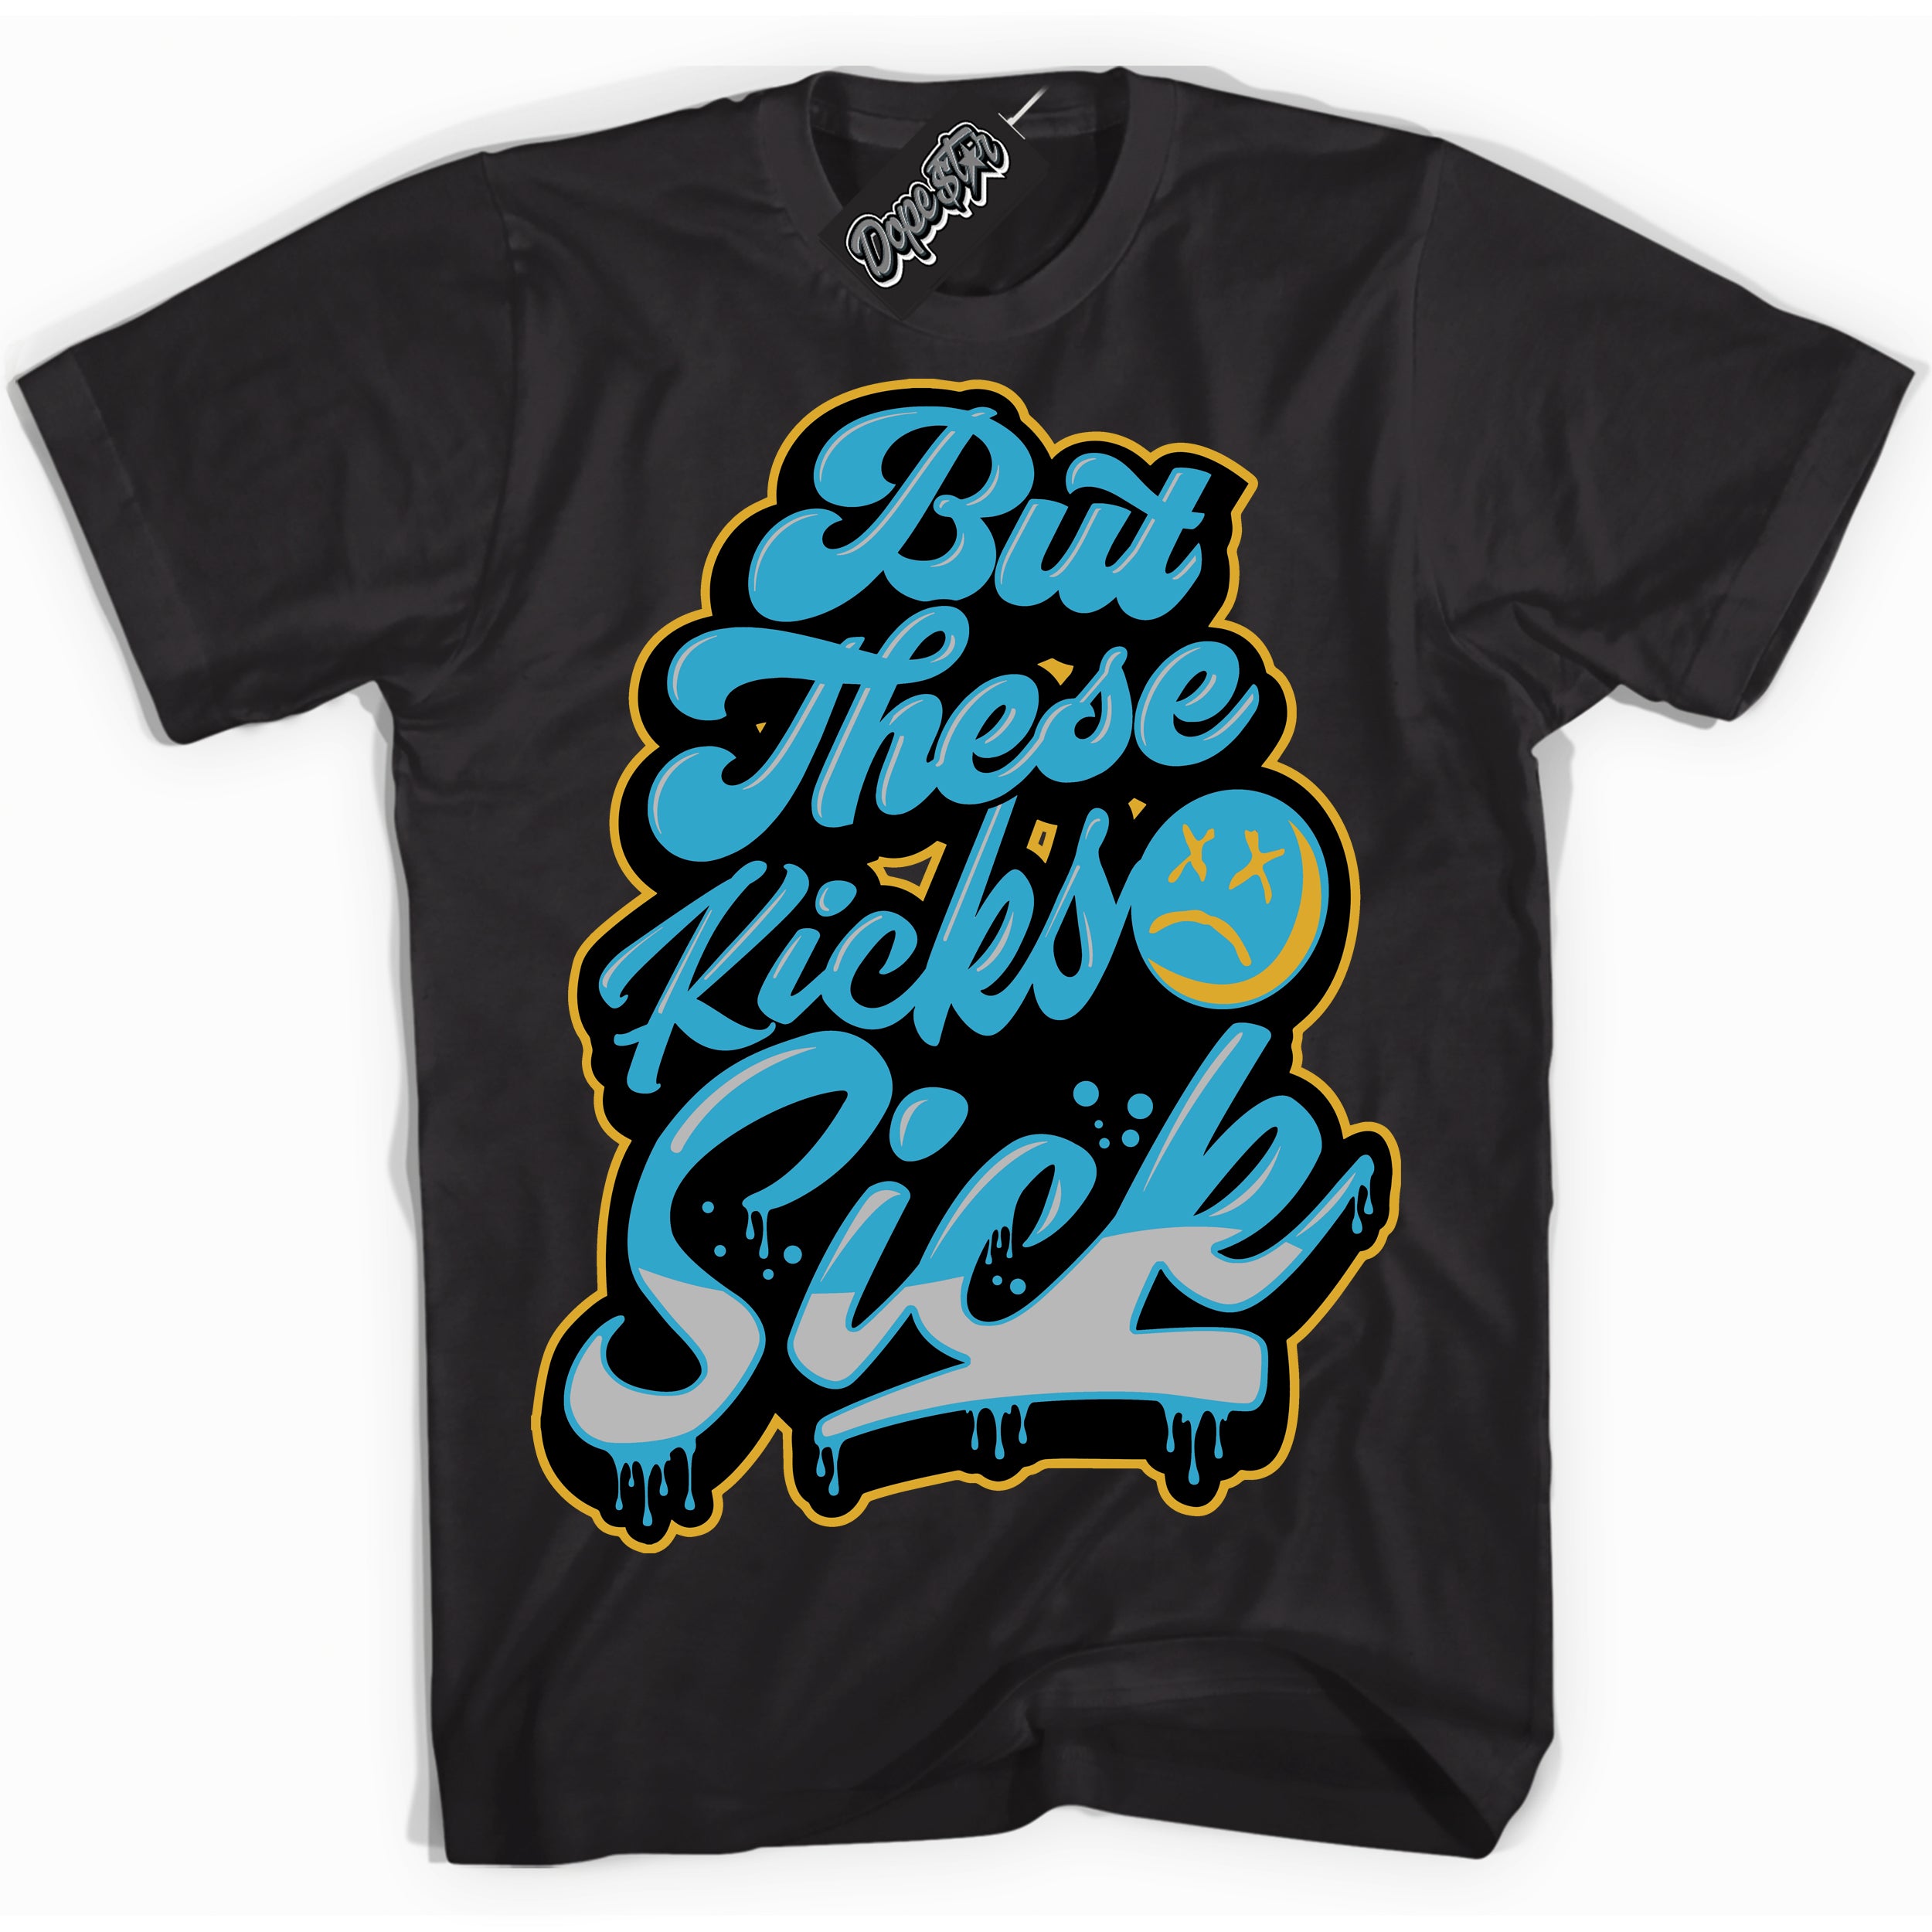 Cool Black Shirt with “ Kick Sick” design that perfectly matches Aqua 5s Sneakers.